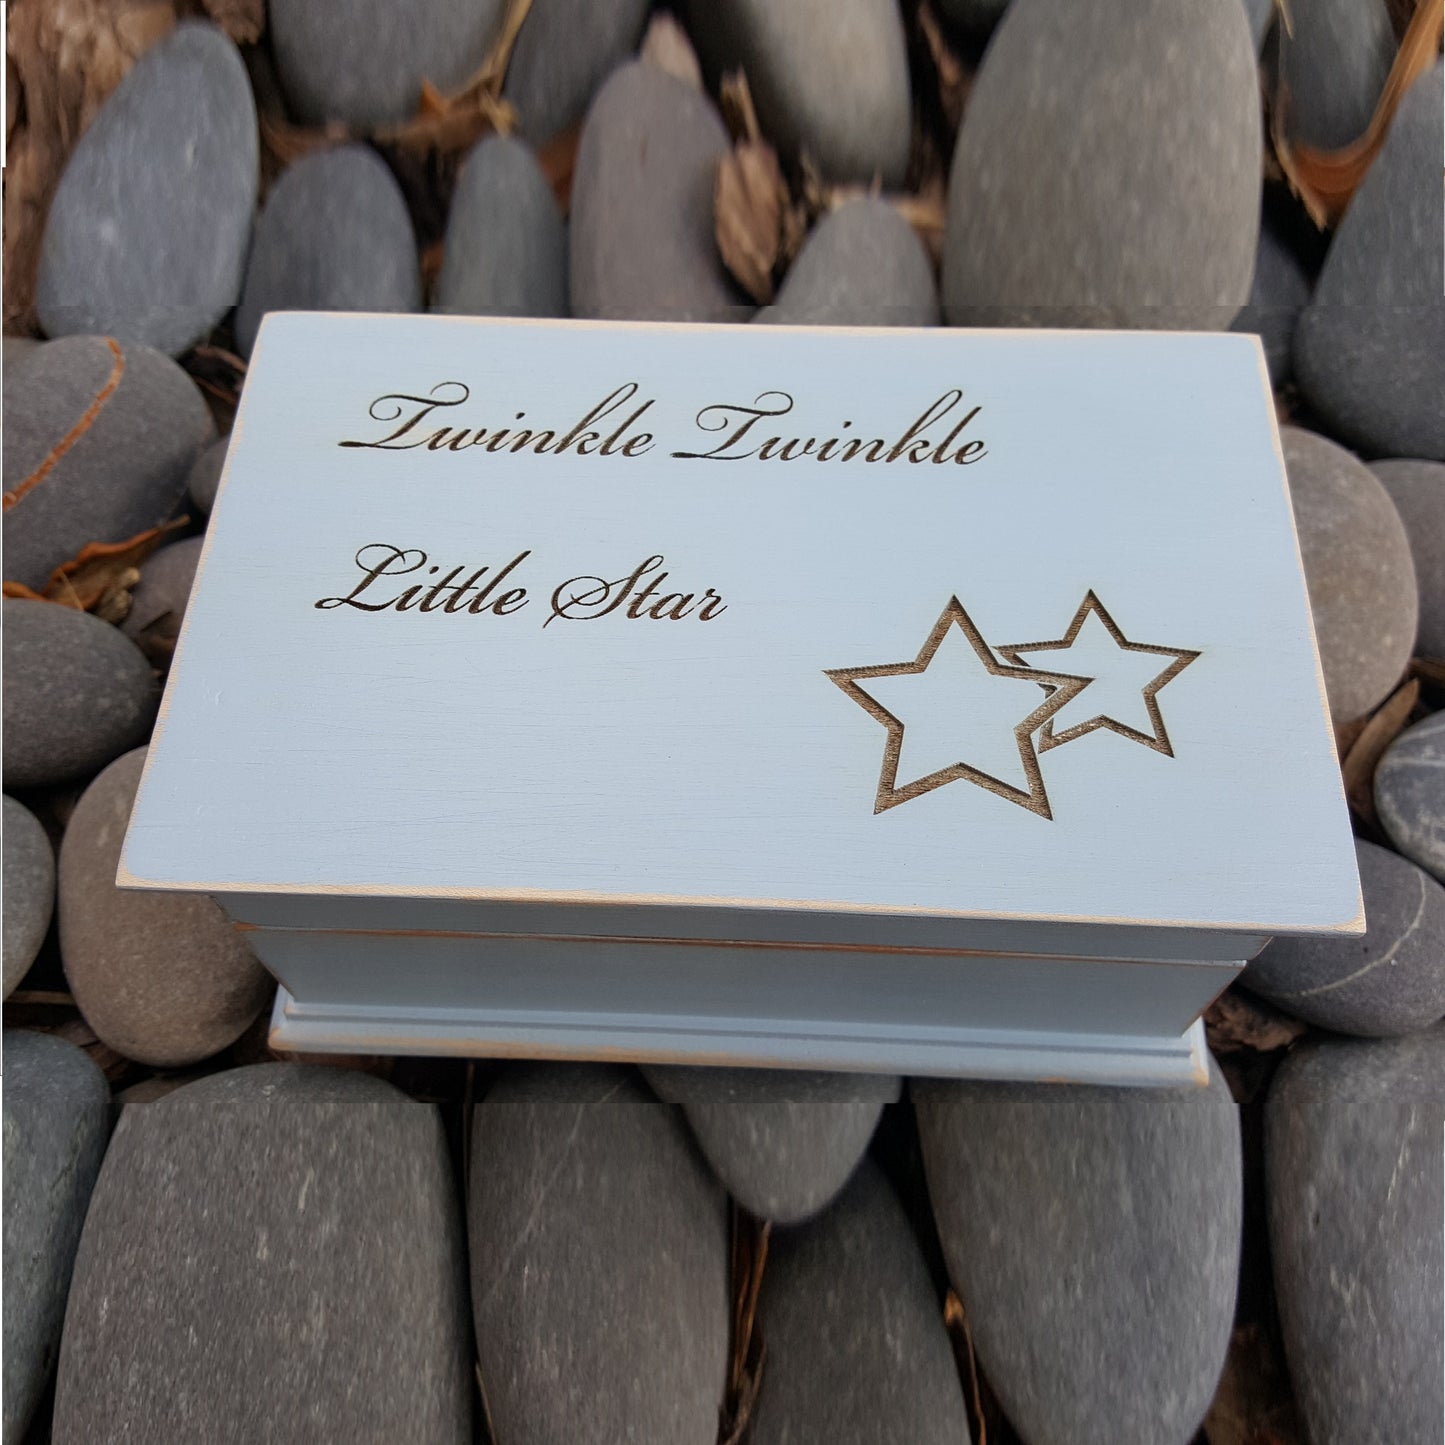 Twinkle, twinkle little star jewelry box with built in music player, choose color and song